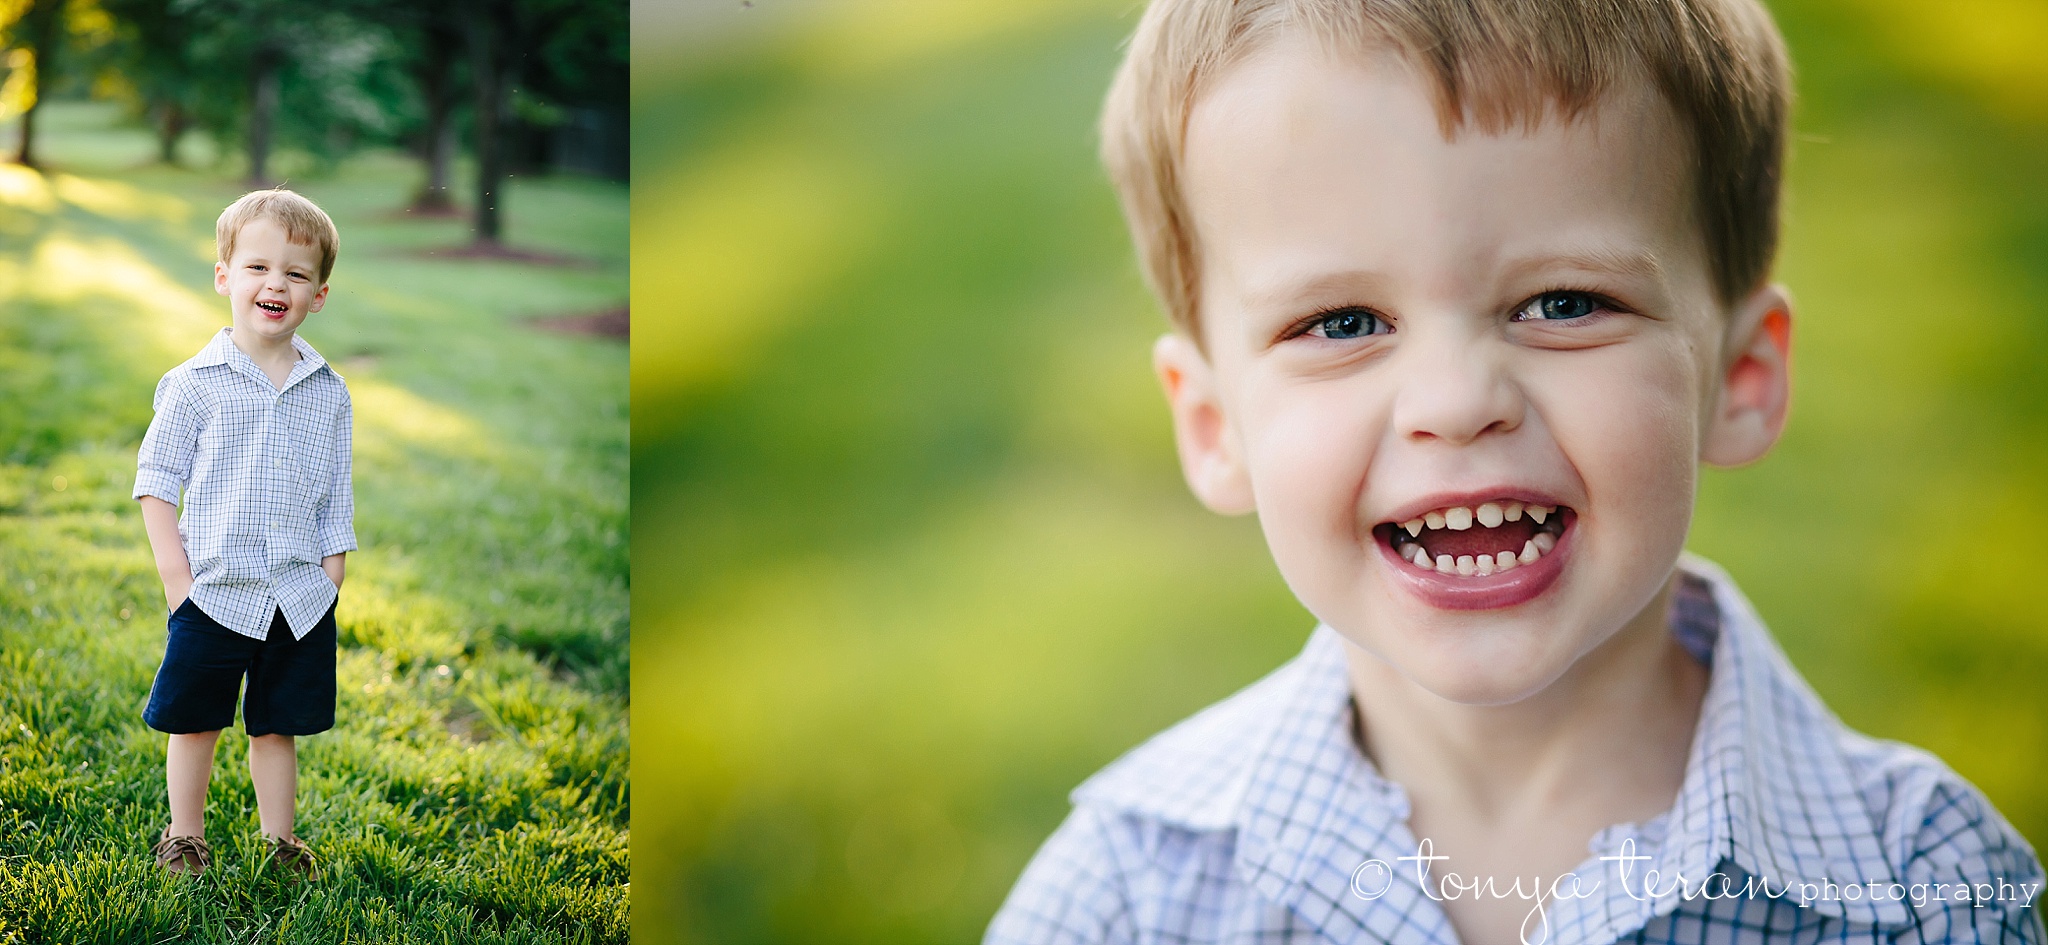 Spring Outdoor Family Photo Session | Tonya Teran Photography, Bethesda, MD Newborn, Baby, and Family Photographer